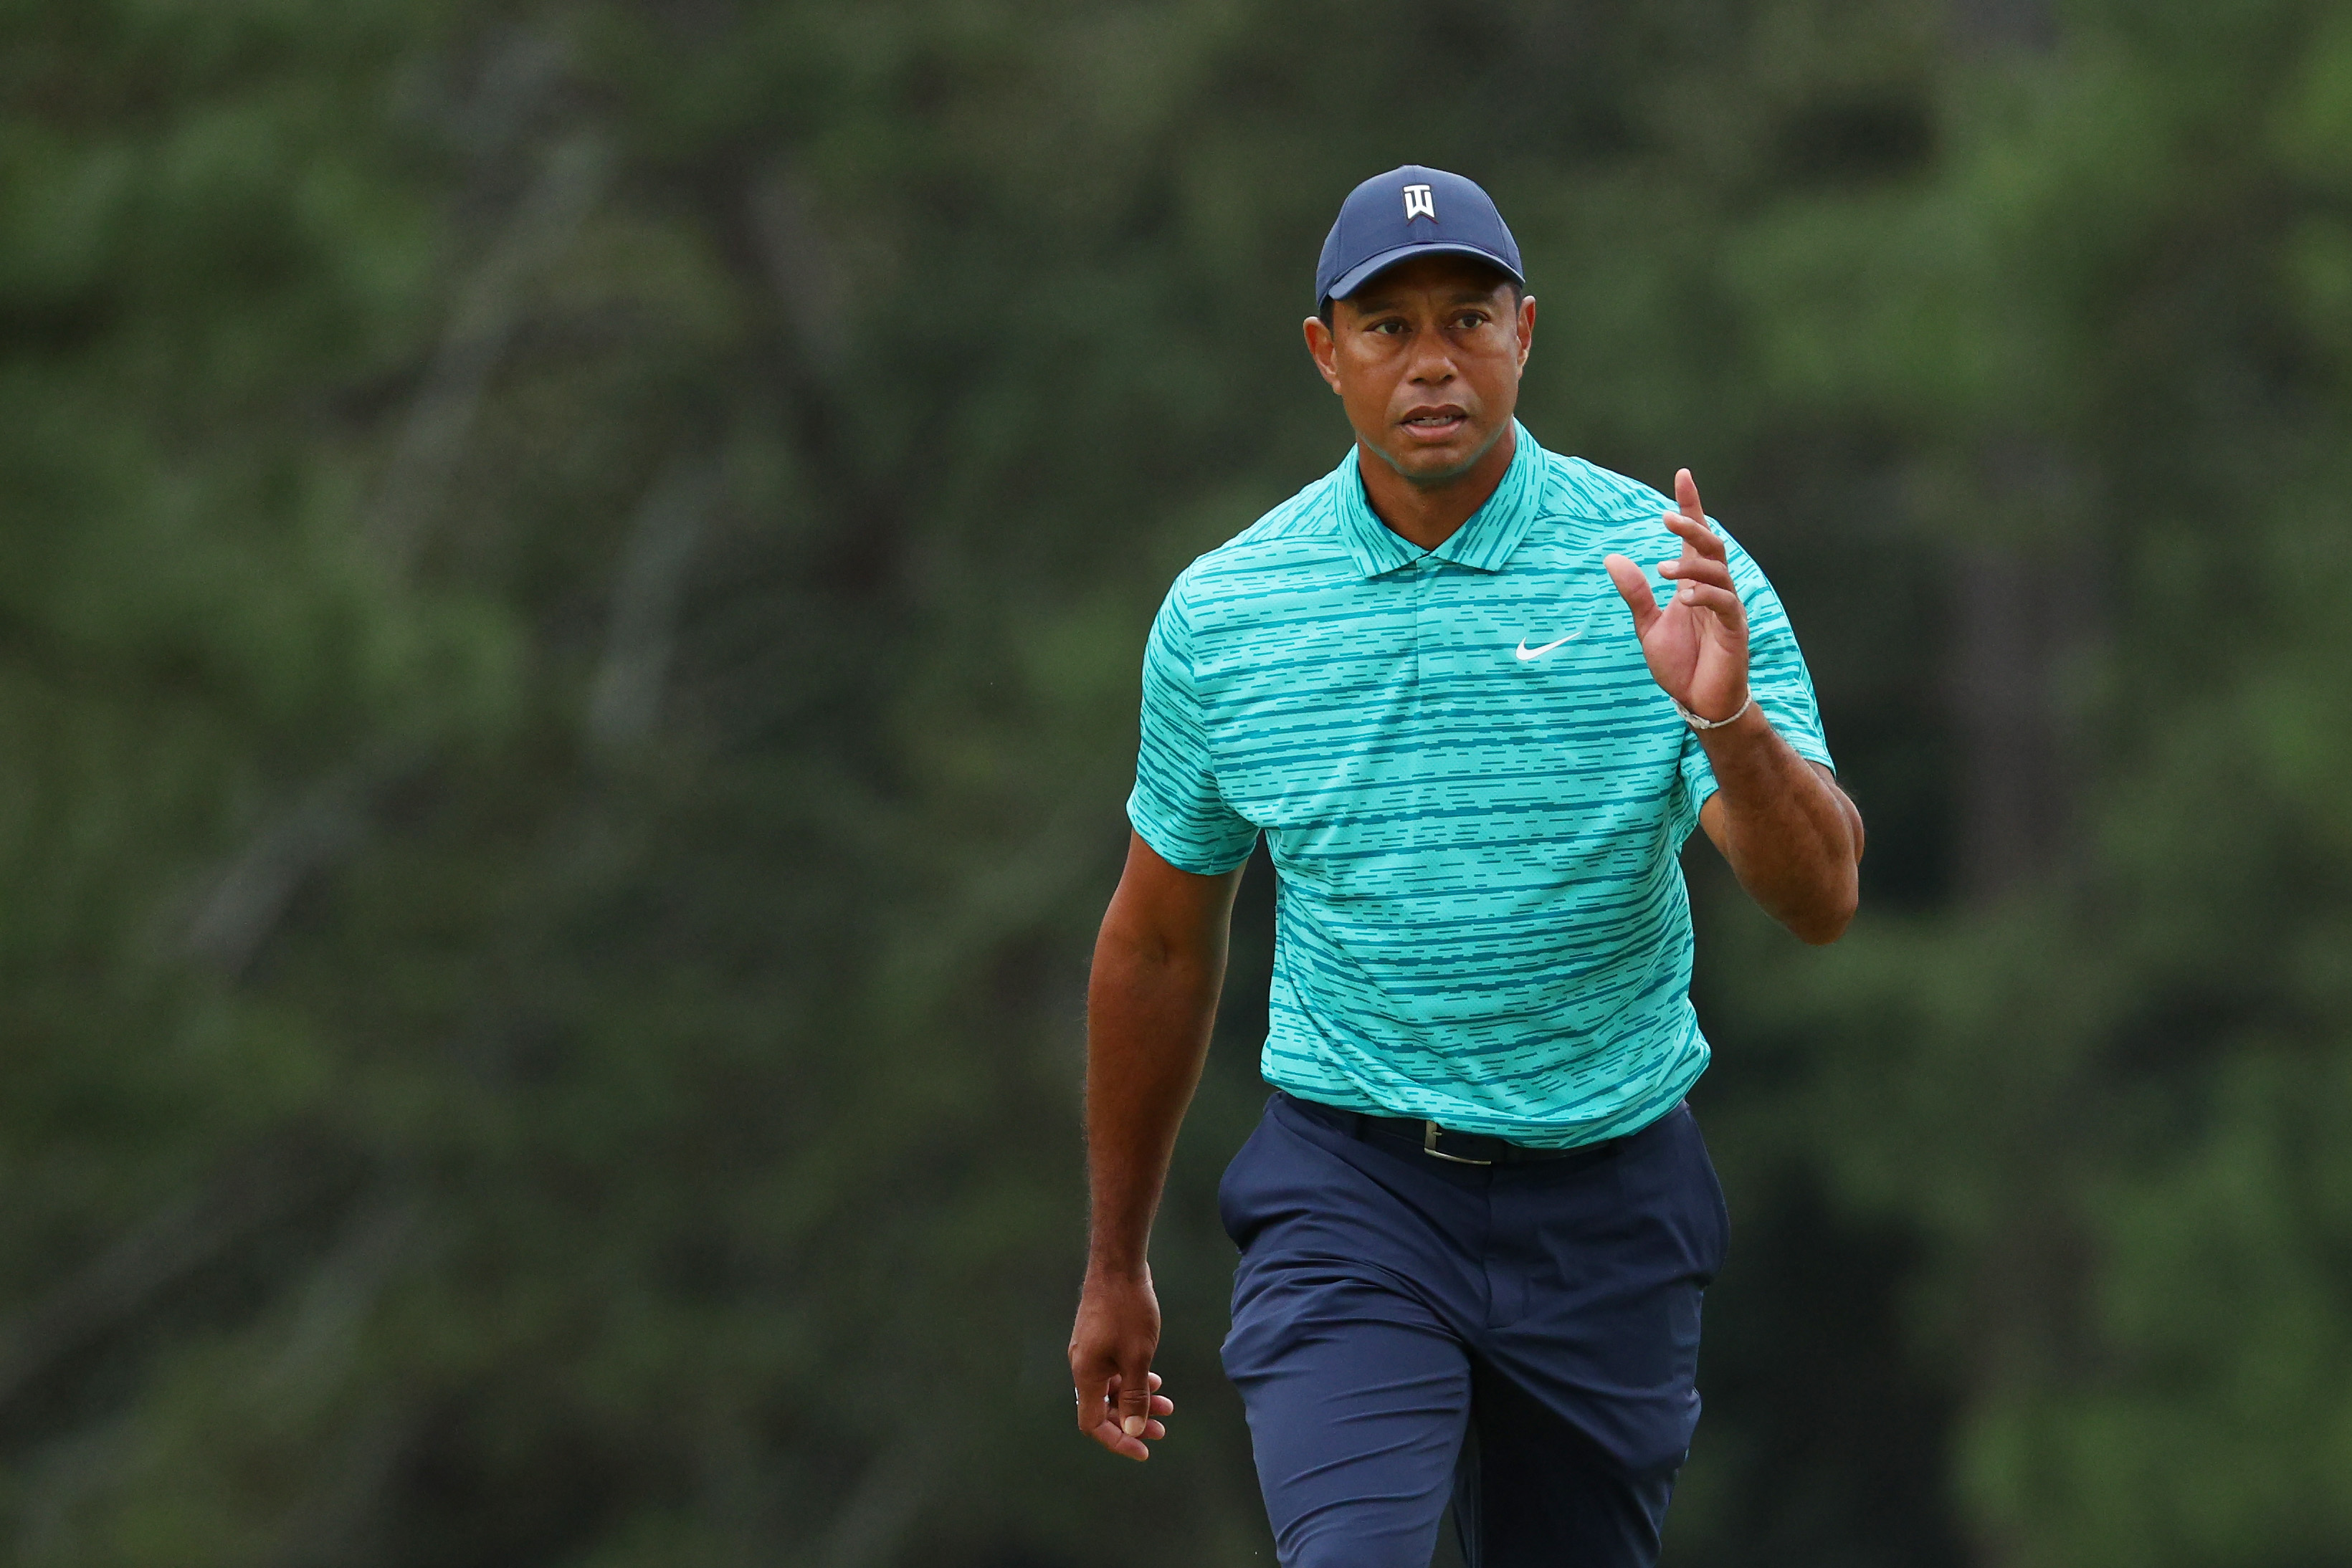 Tiger Woods waves to the crowd as he walks to the 18th green during the second round of The Masters at Augusta National Golf Club on April 08, 2022 in Augusta, Georgia.